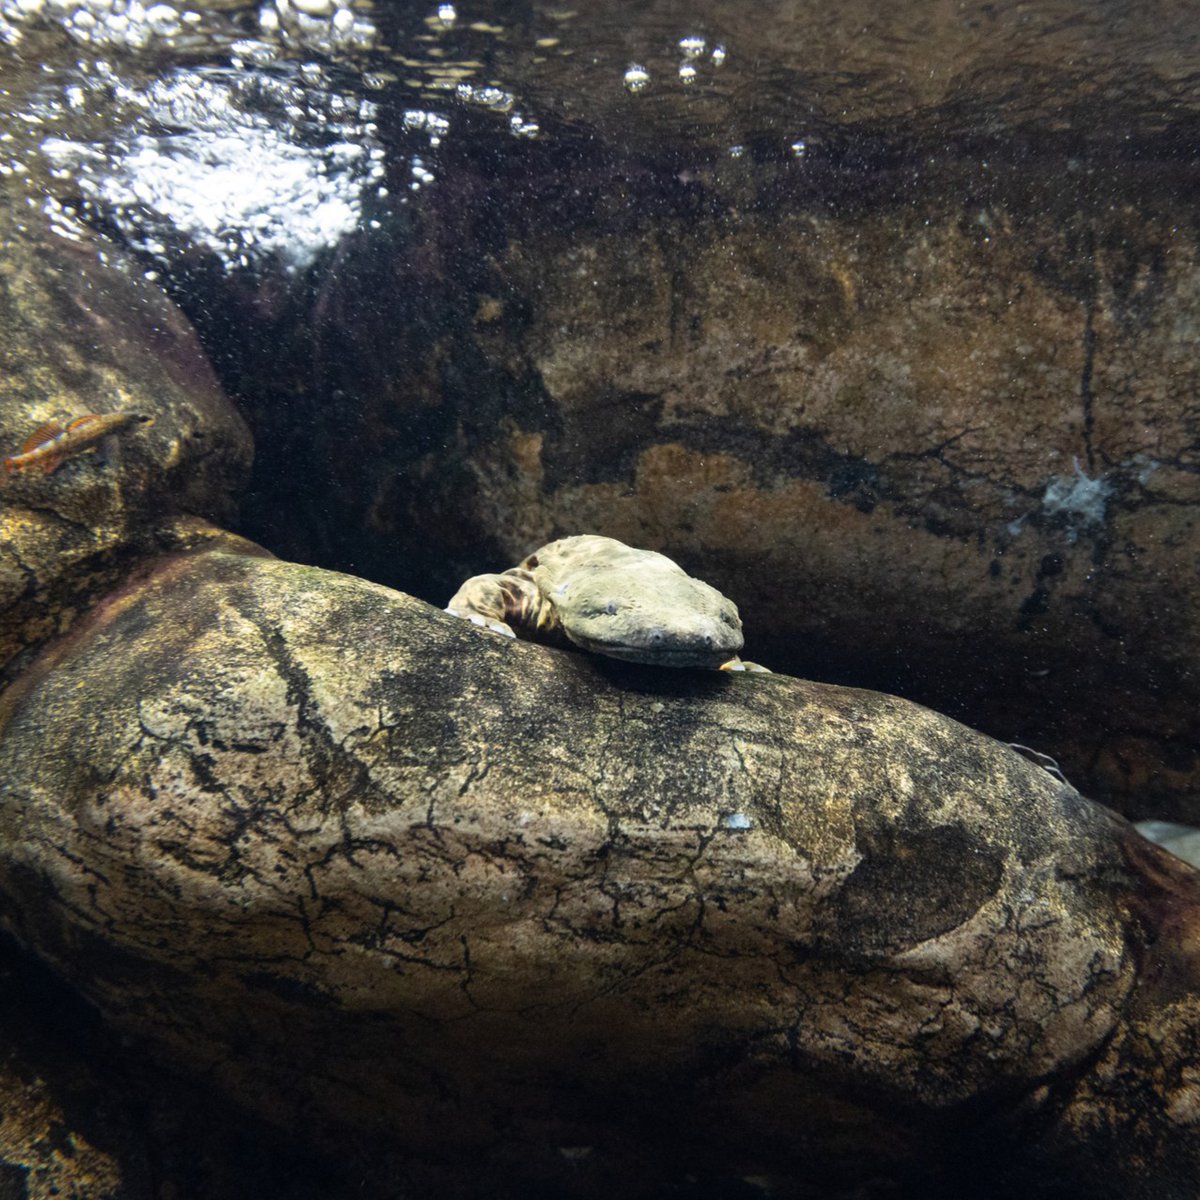 Staring at the clock from your desk on a Friday afternoon. 😳 Photo description: Our hellbender salamander peeks over the rocks in its exhibit to stare in the direction of the camera.